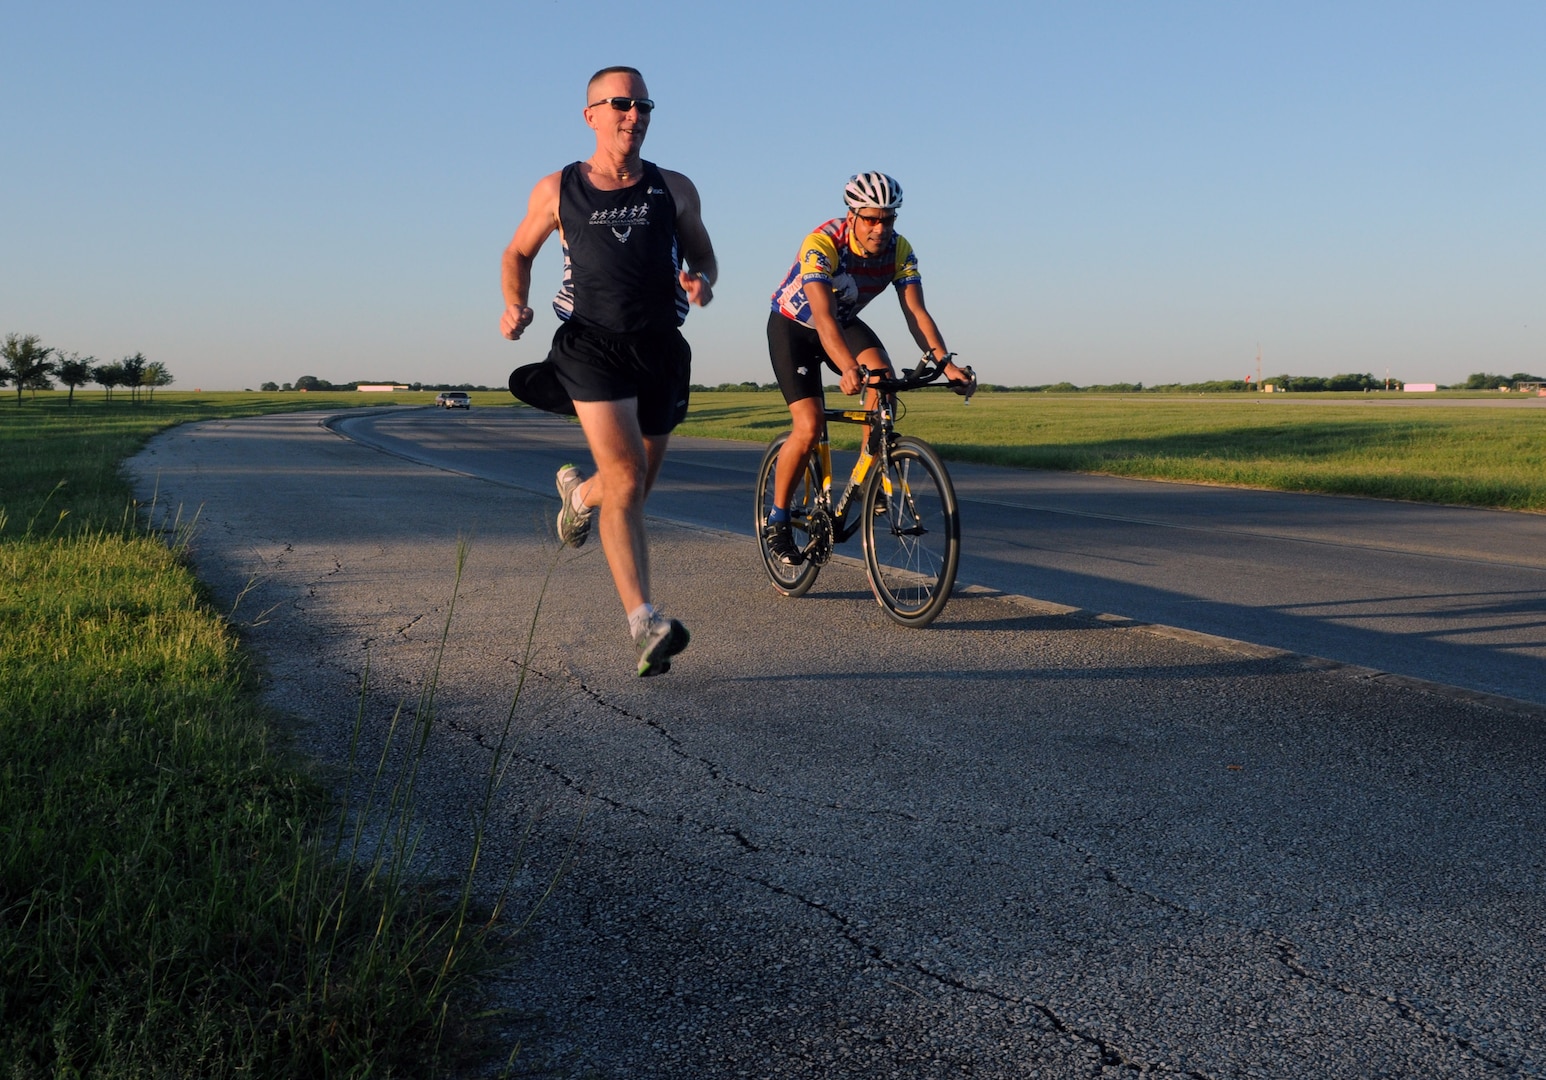 Bill Relyea, left, and Orlando Gonzales competed together to top 17 other teams in the Randolph Biathlon Aug. 30. (U.S. Air Force photo by Rich McFadden)